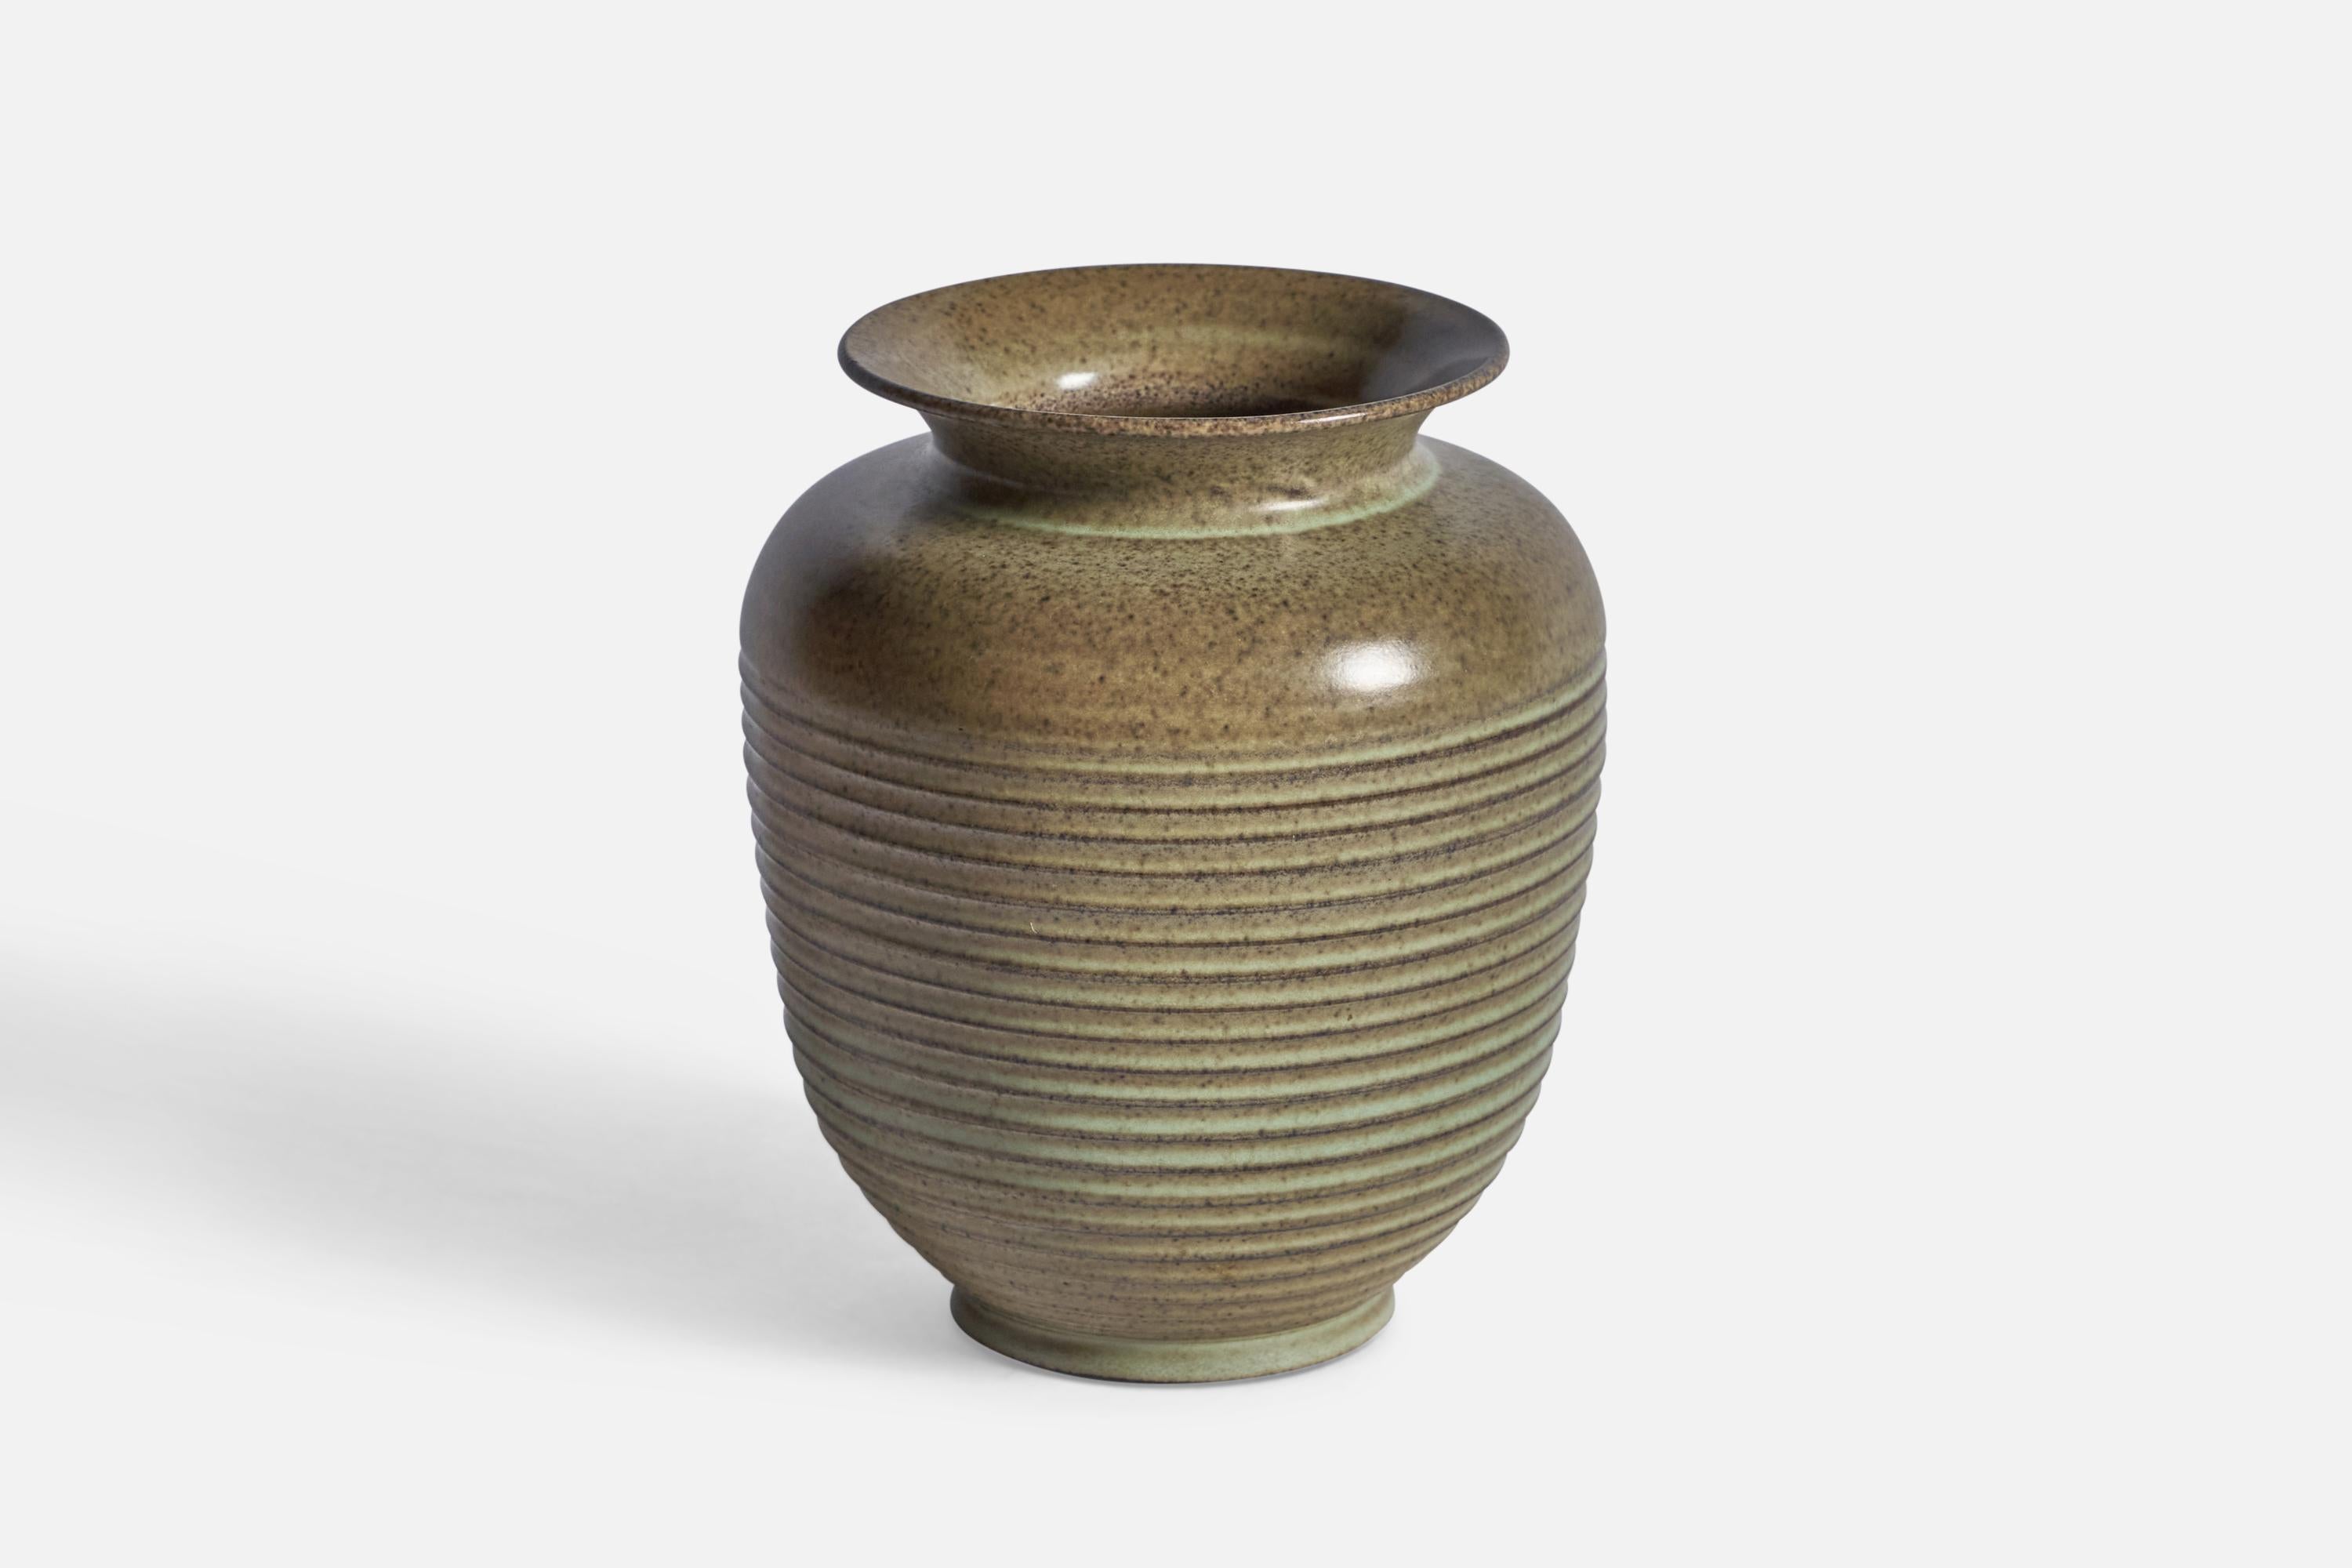 A green and brown-glazed incised stoneware vase, designed and produced in Denmark, c. 1940s.